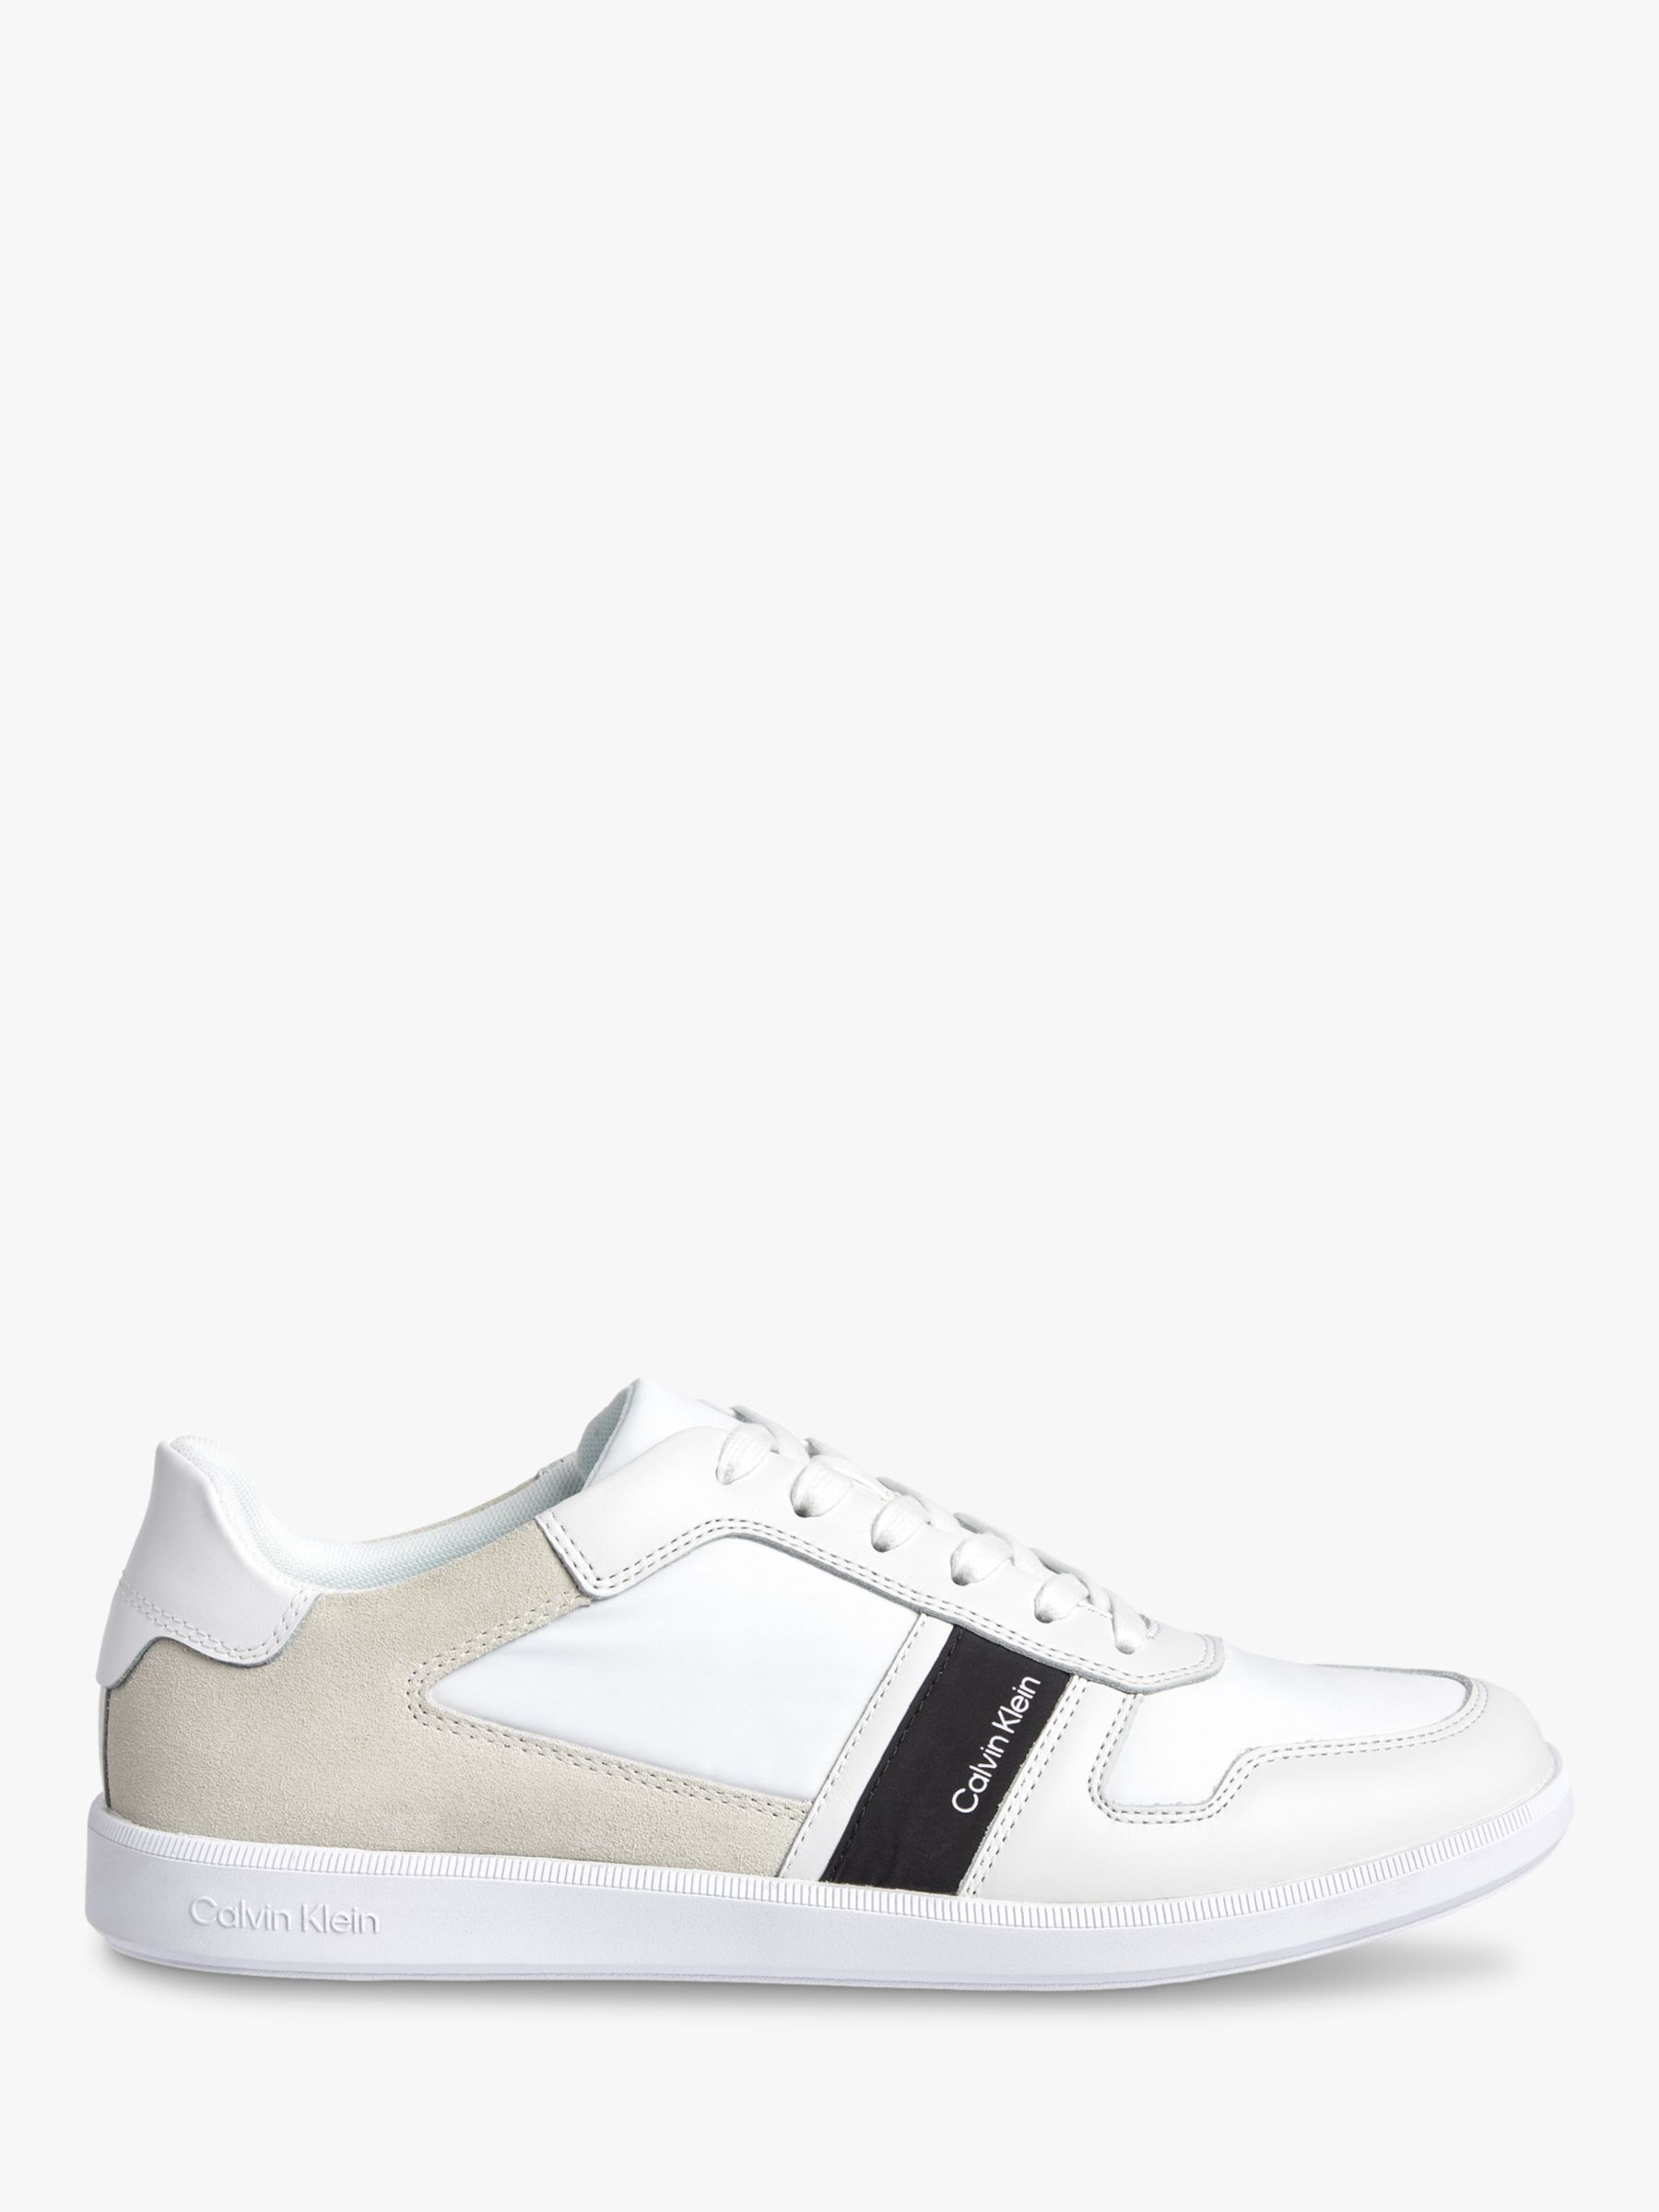 Calvin Klein Low Top Lace Up Trainers, Triple White at John Lewis ...